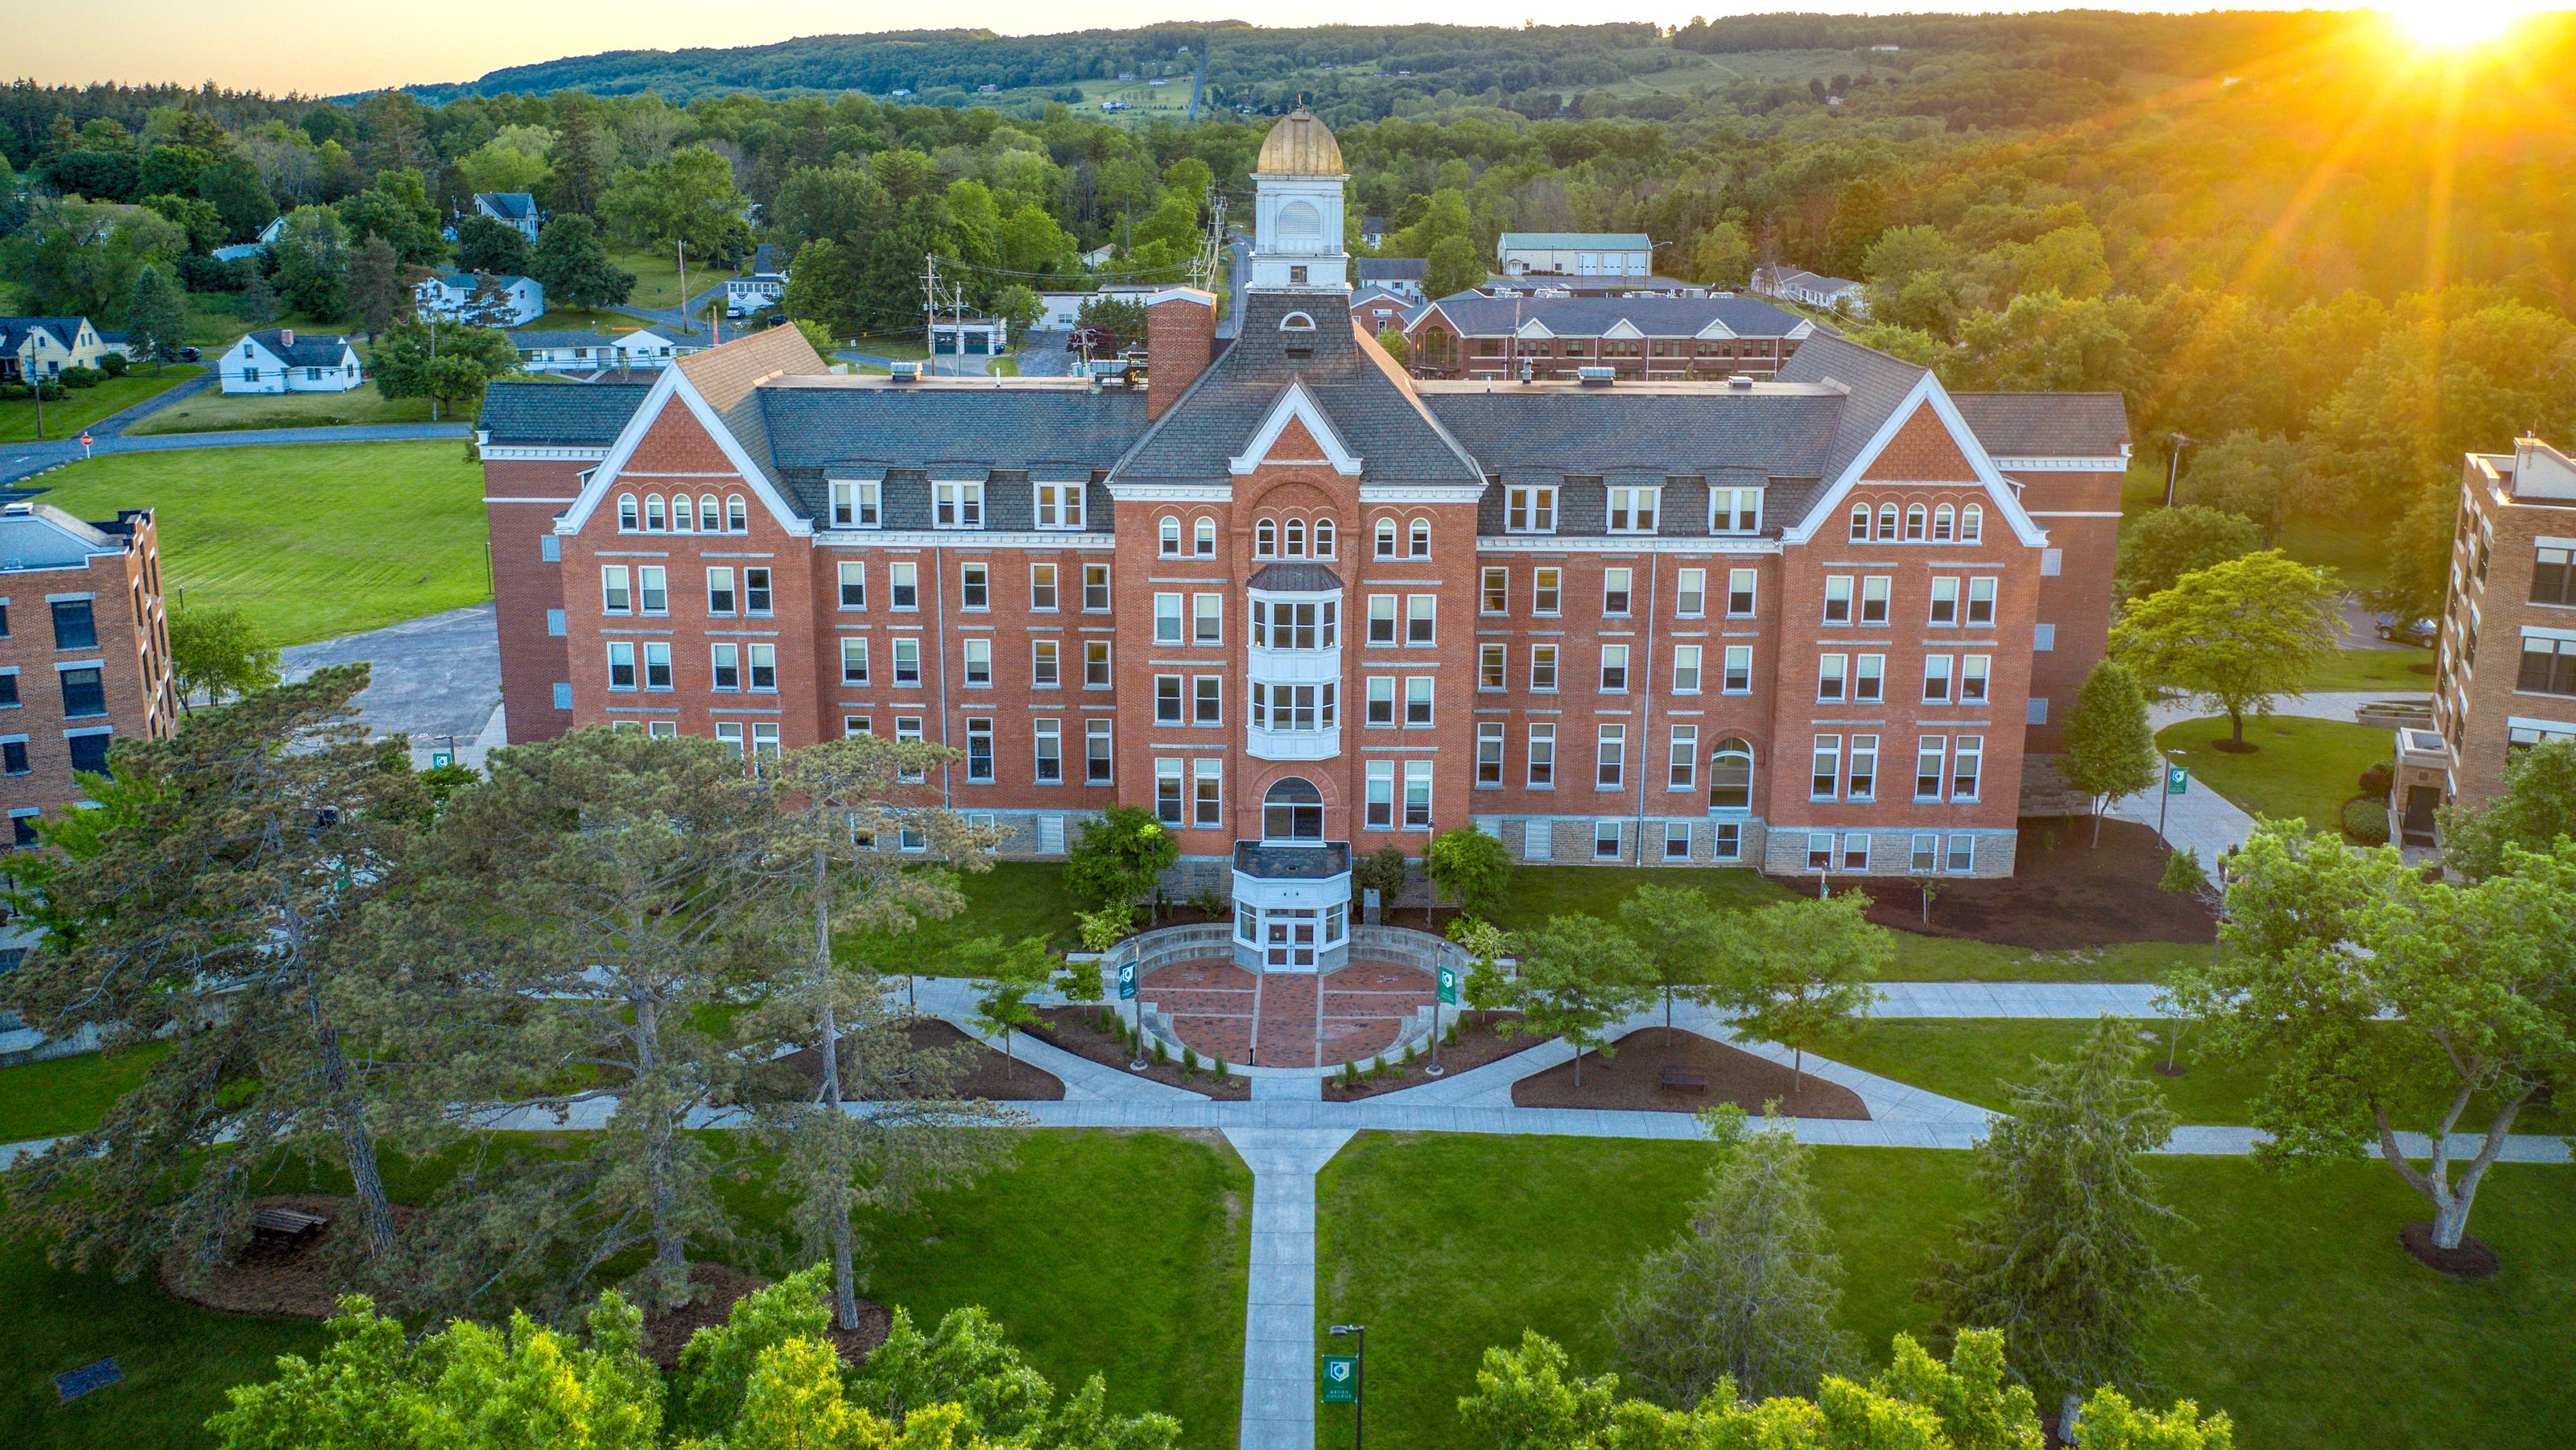 Keuka College will celebrate Commencement 2021